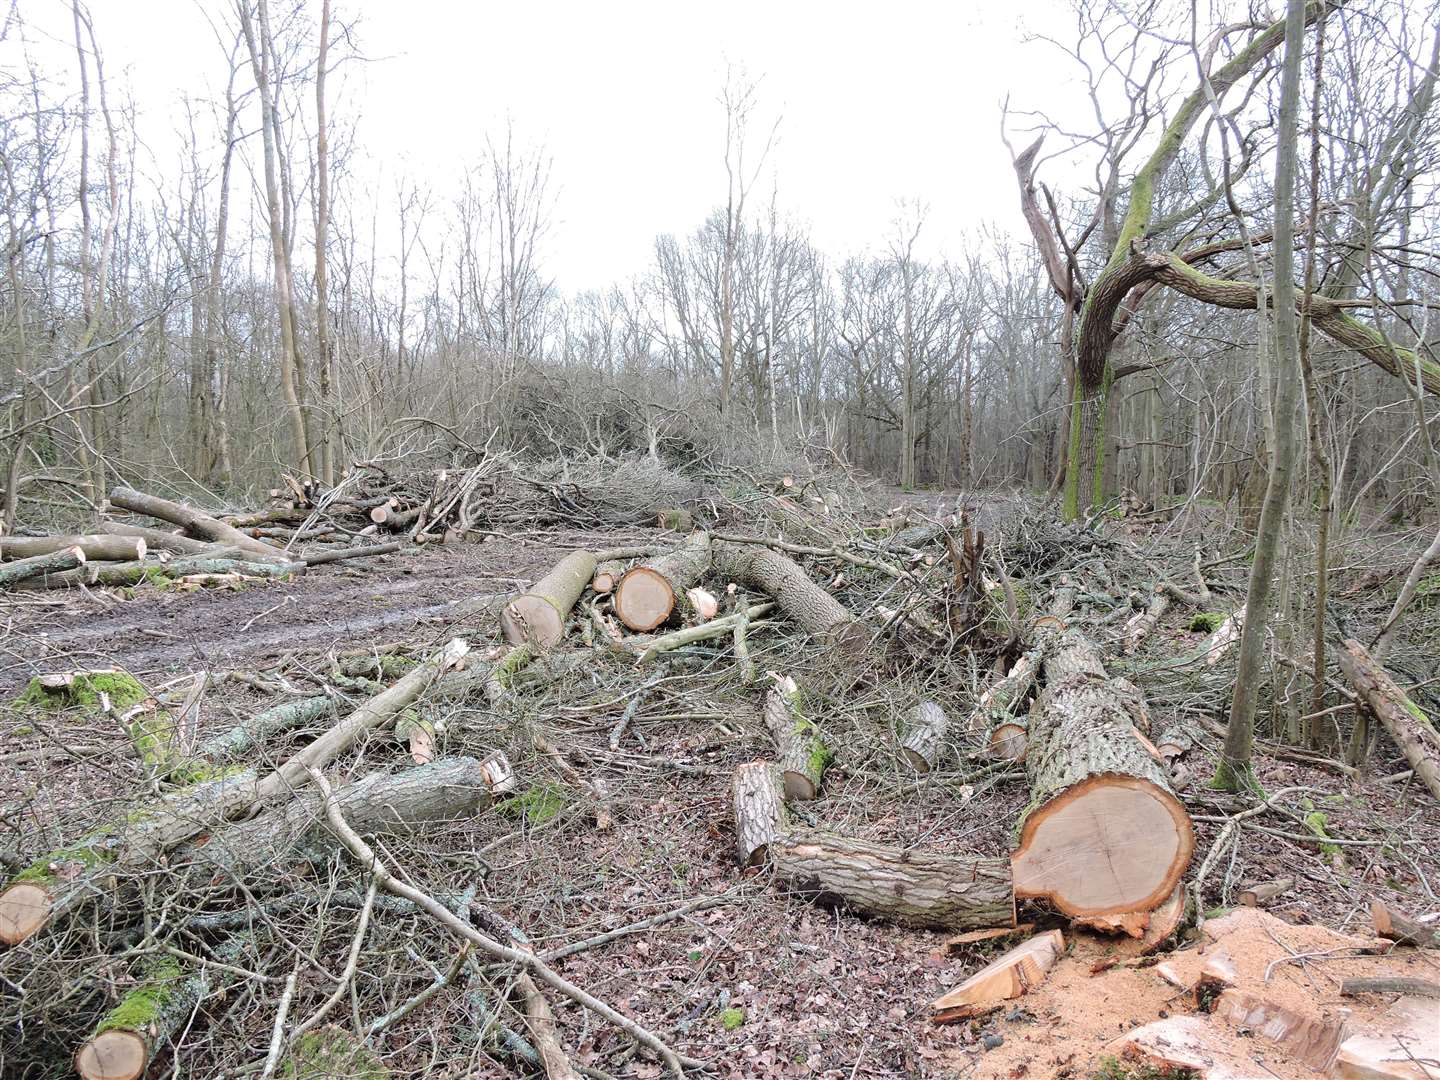 The council has been powerless to stop the illegal logging